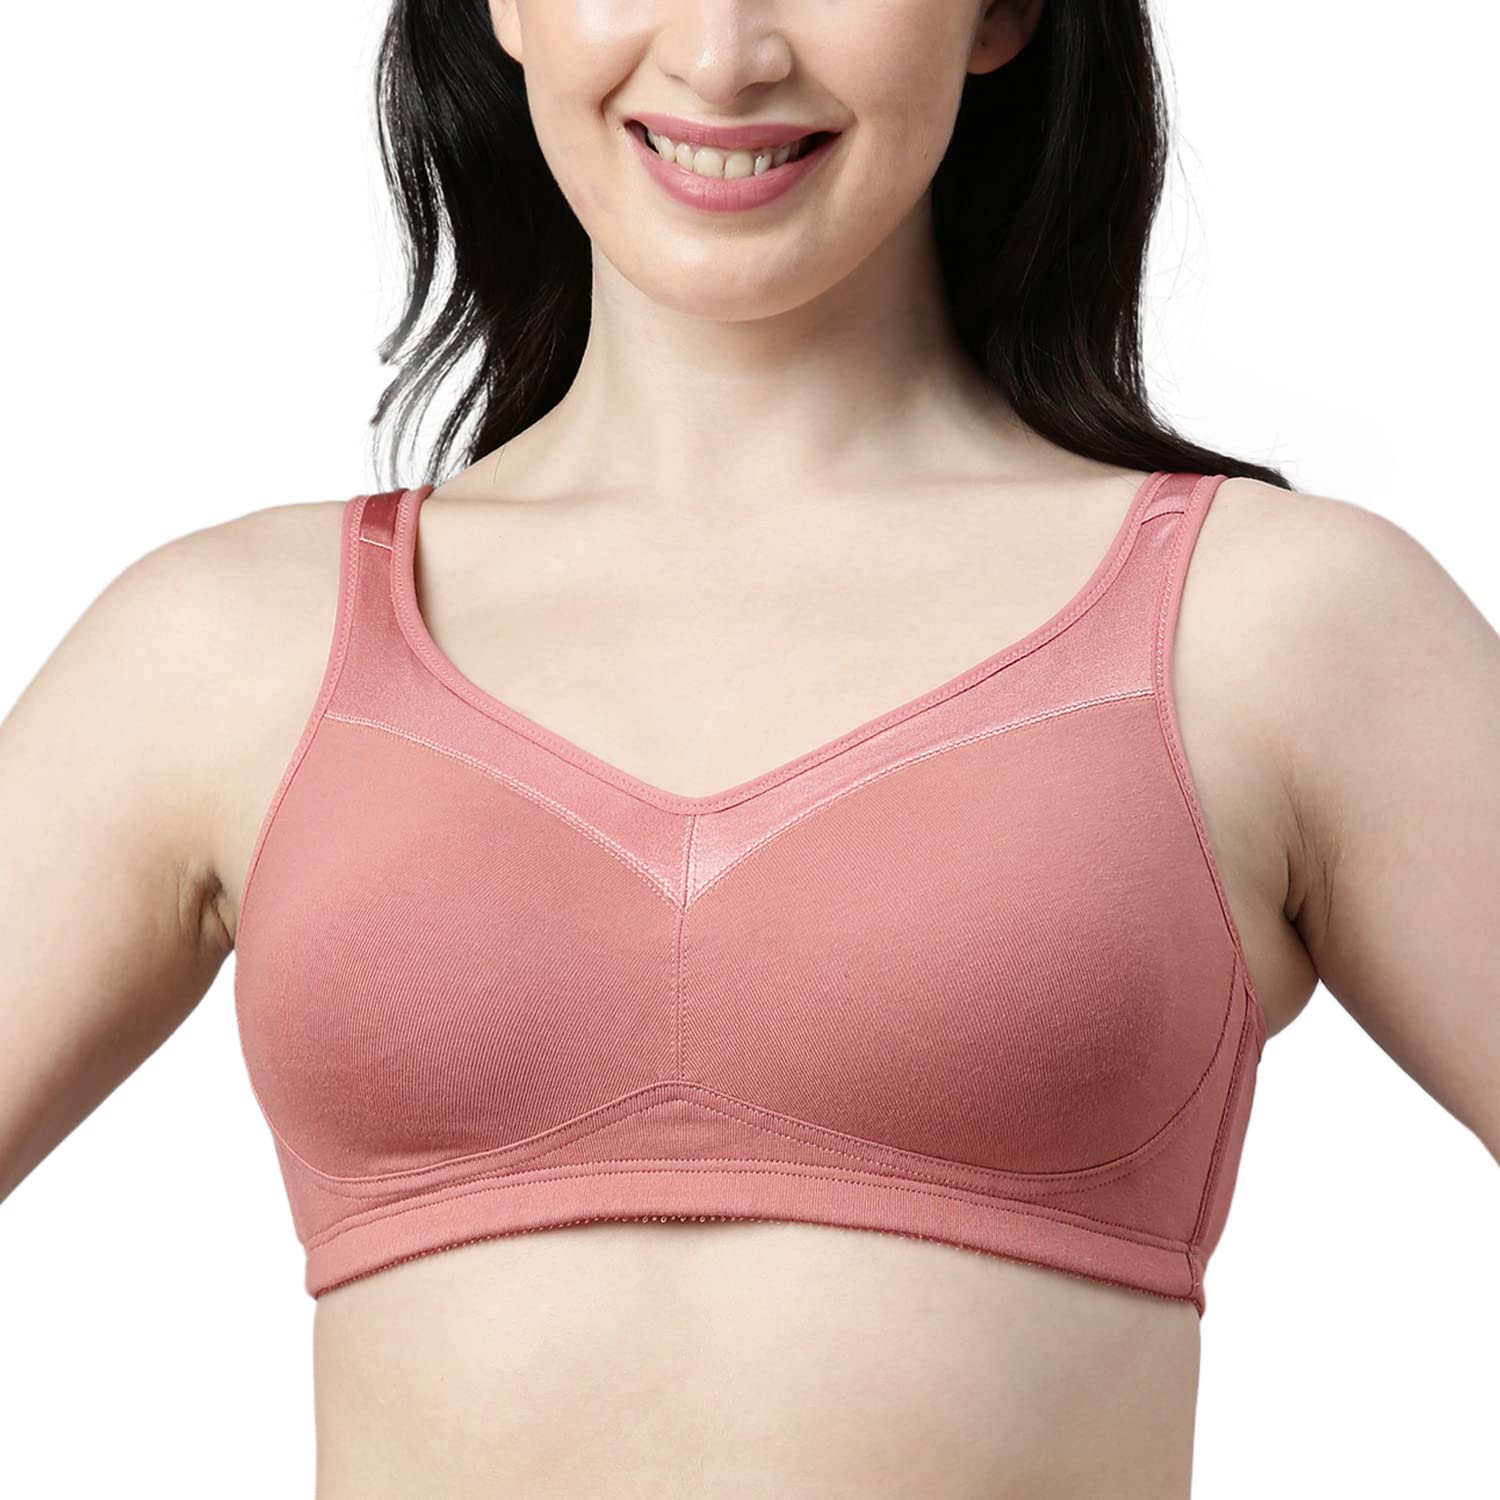 Enamor F035 Minimizer Full Support Bra - Non-Padded Wired High